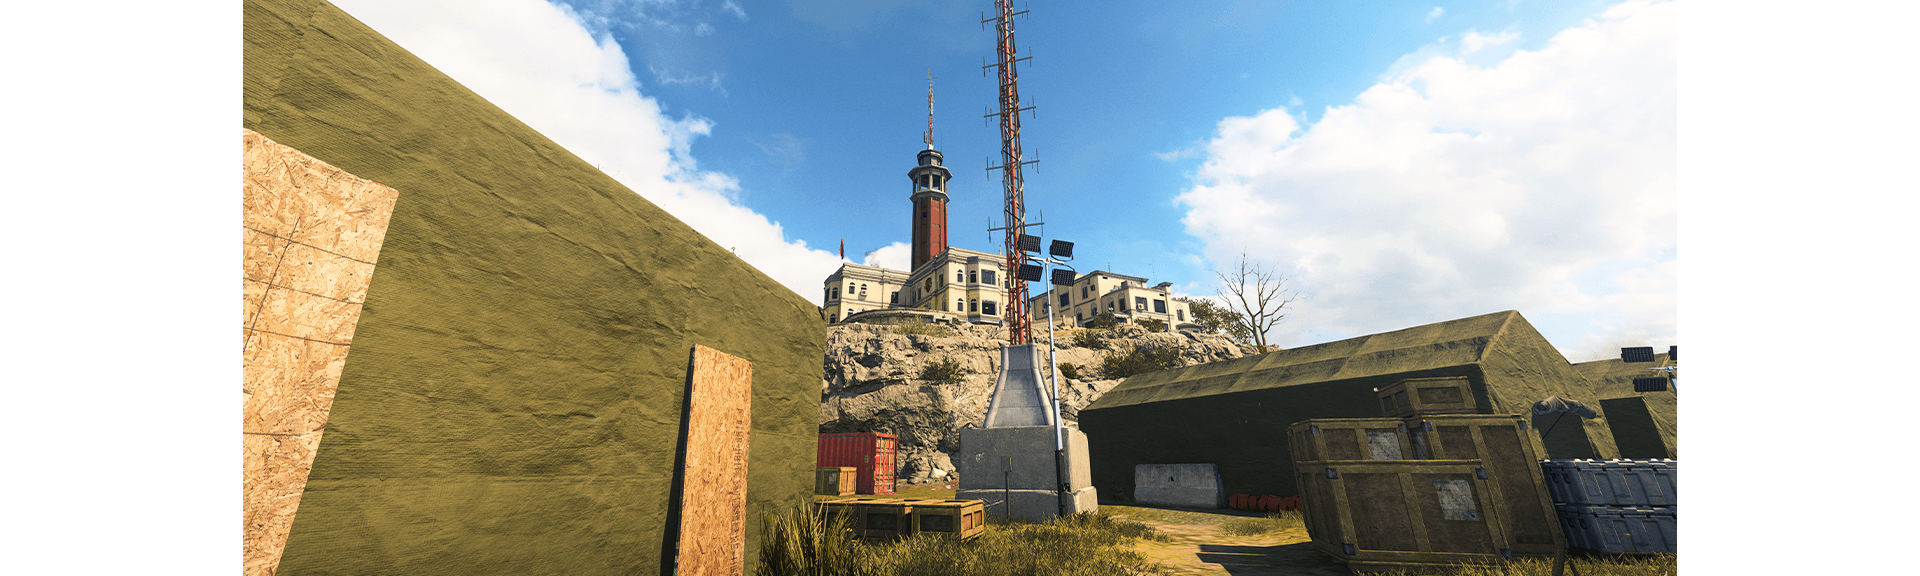 CoD Warzone Season 2: The Weapon Trading Station is now live on Rebirth Island